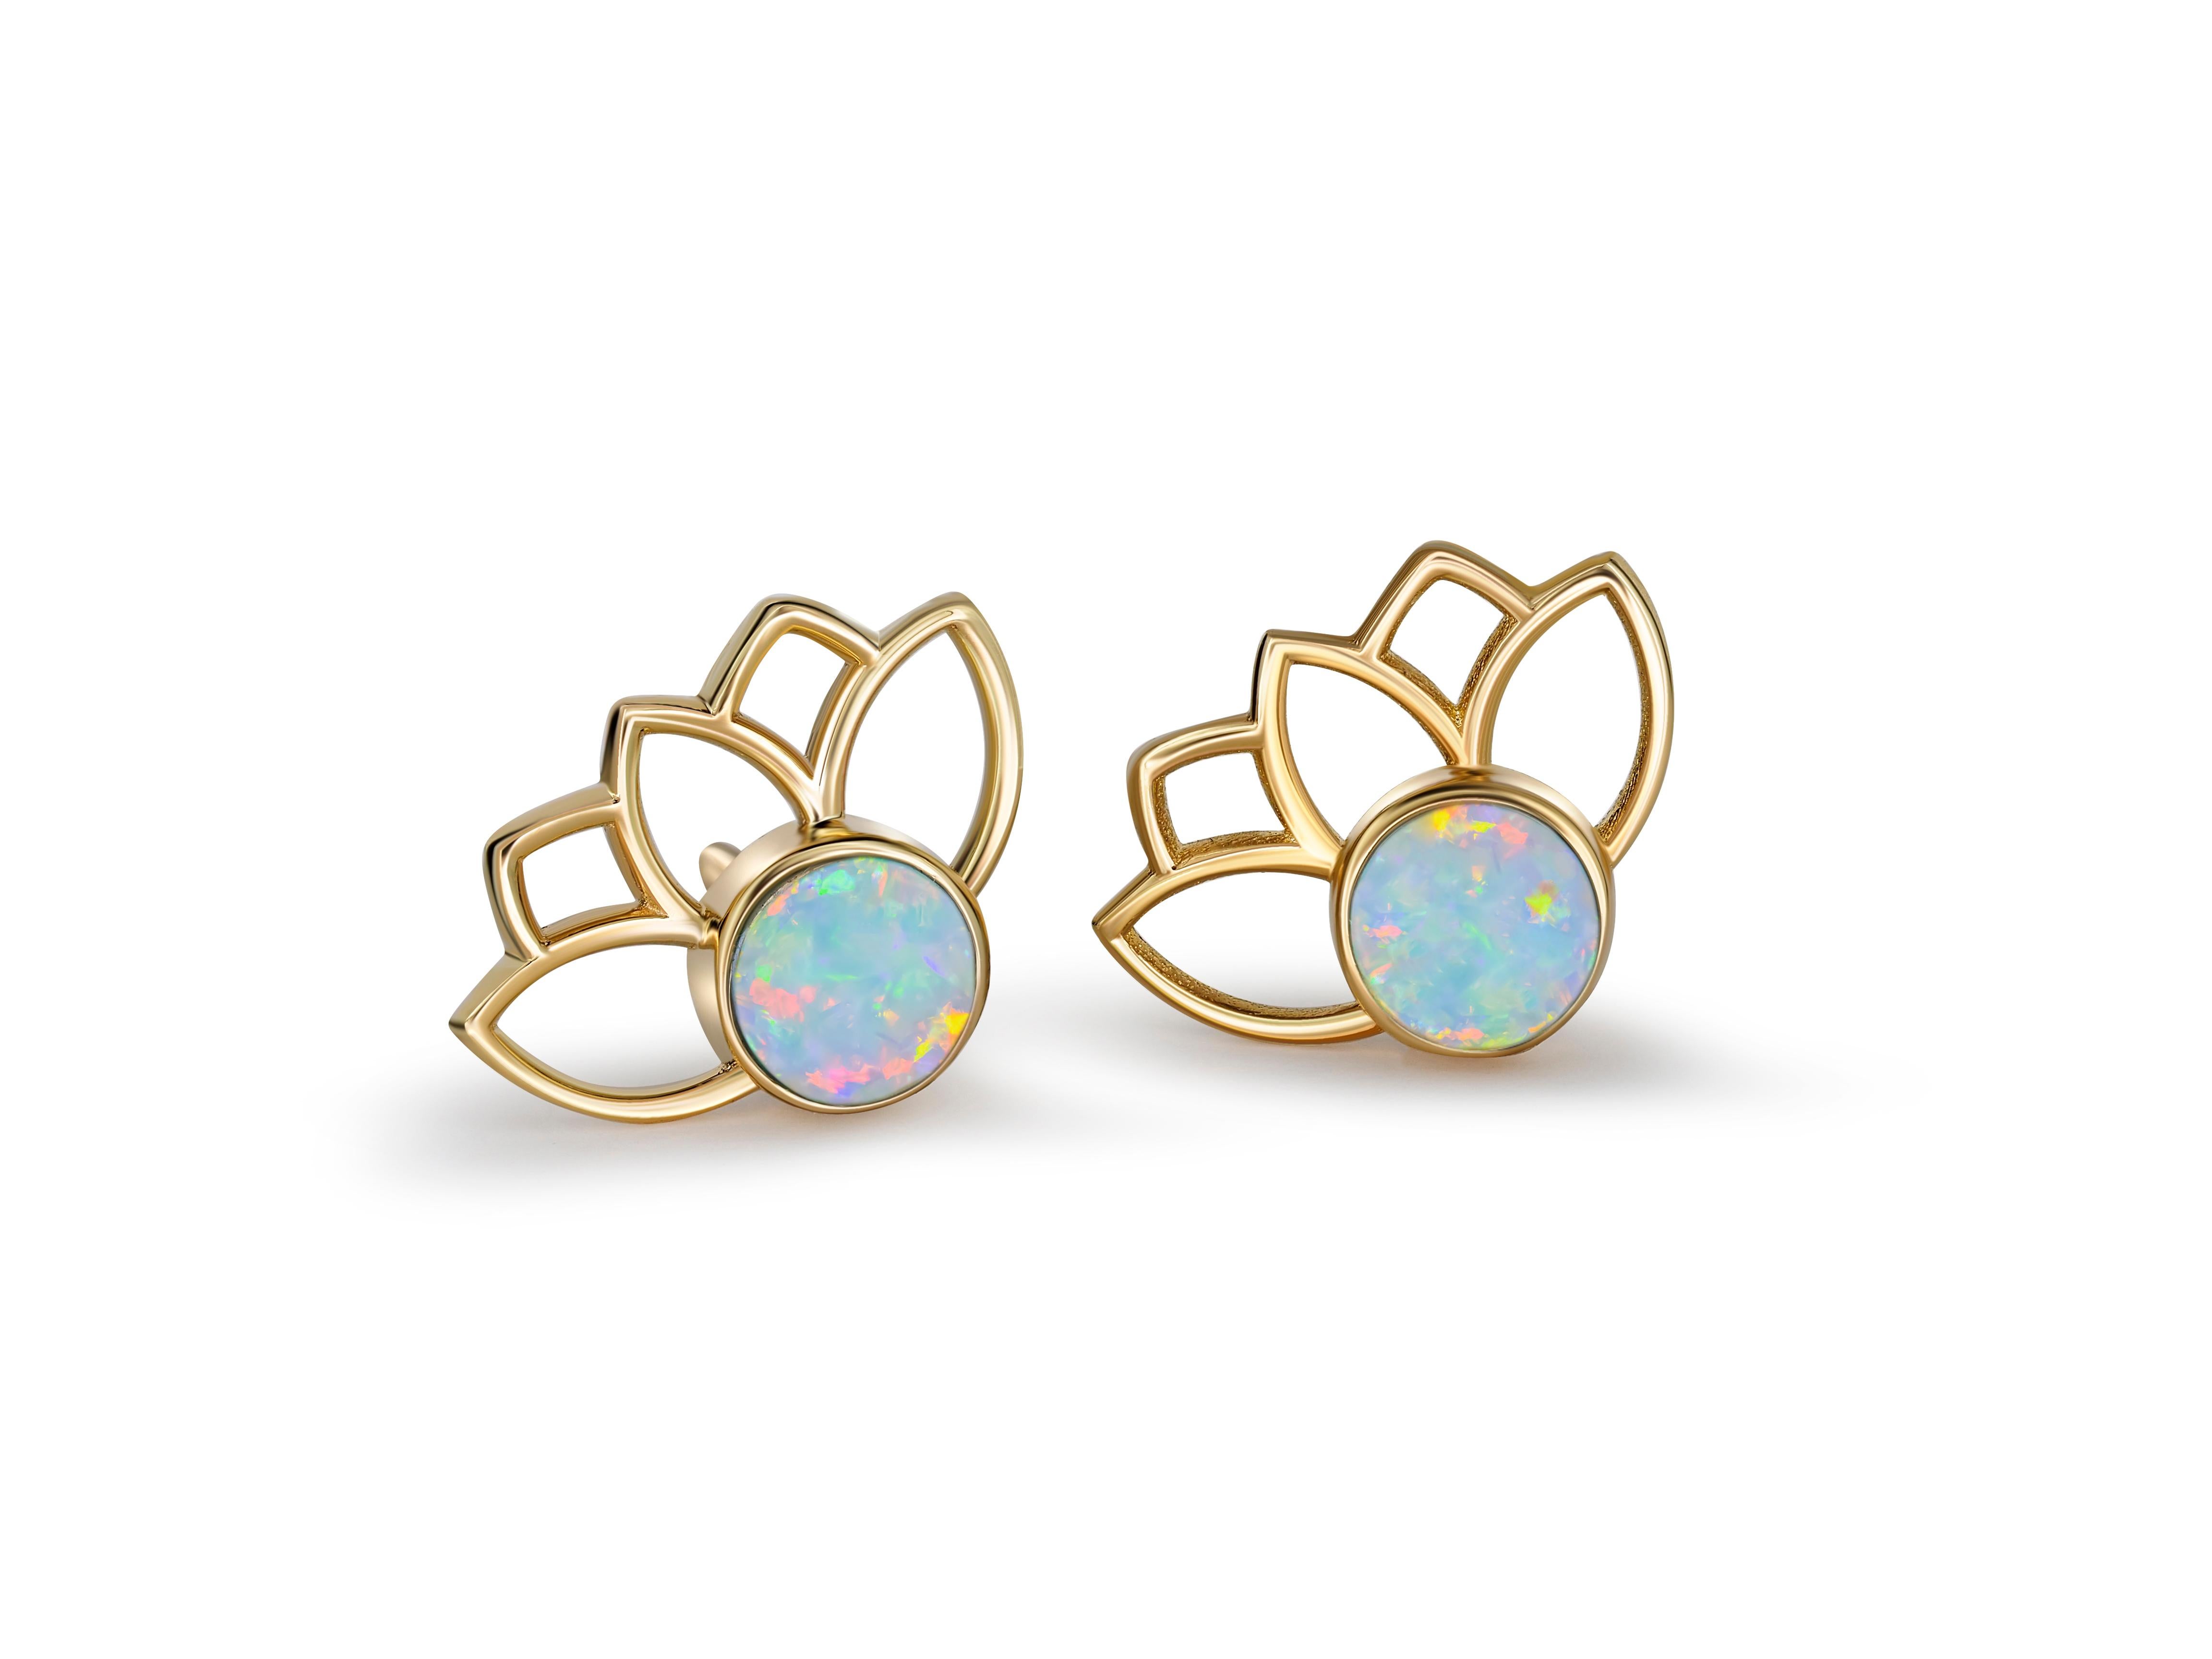 Lotus earrings studs with opals in 14k gold.  Opal cabochon earrings.  Opal Gold Earrings. Flower gold earrings. Round  cab opal earrings studs. Everyday earrings with opals. Flower gold earrings.

Metal: 14 karat gold
Weight: 1.5 g.
Size: 11.45 x